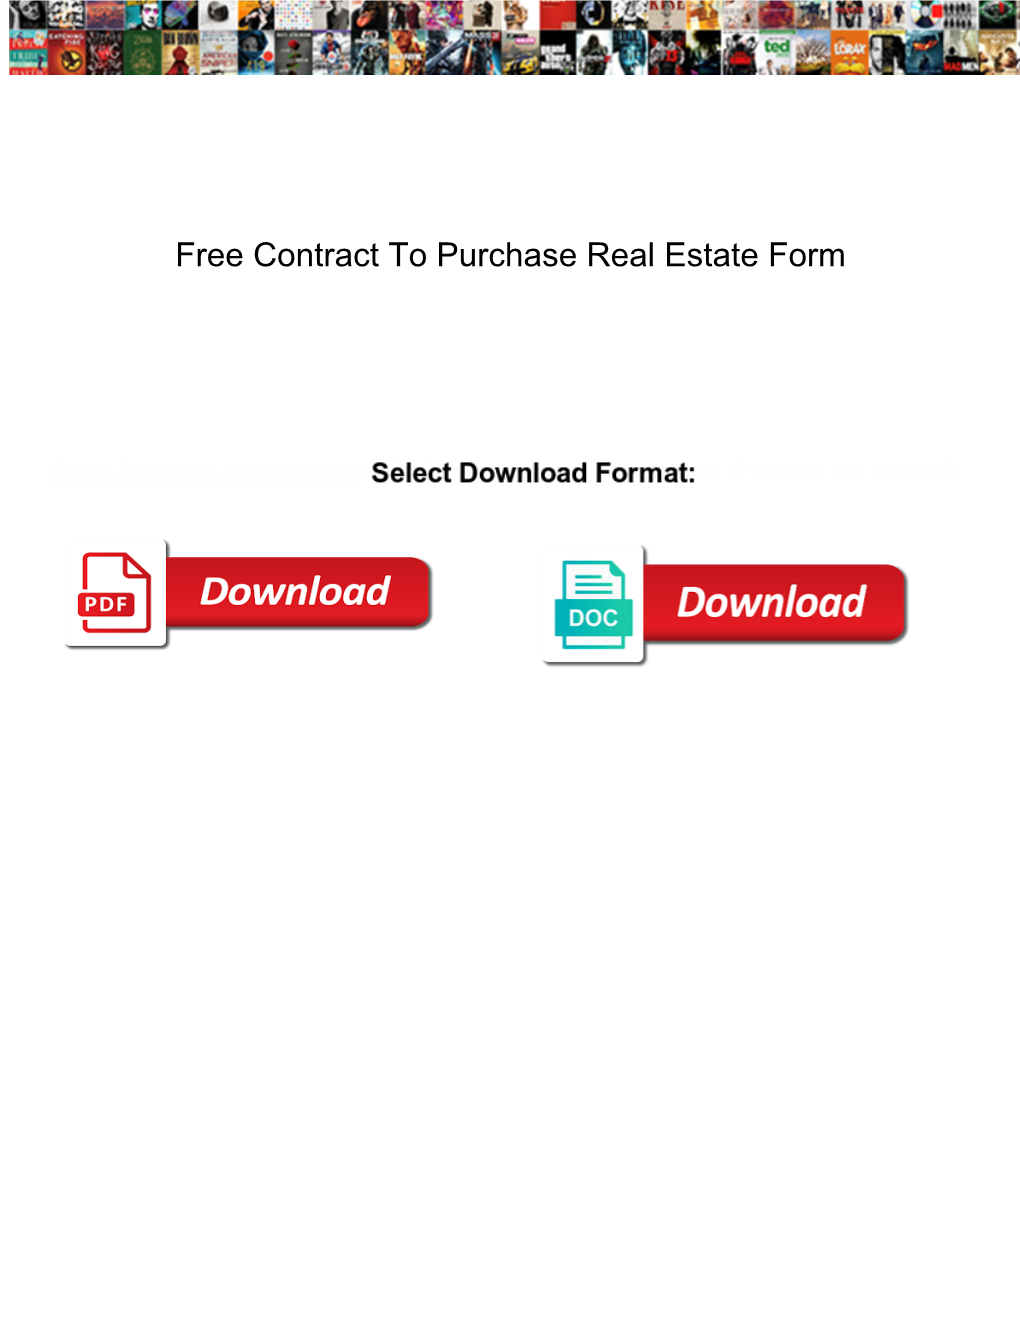 Free-Contract-To-Purchase-Real-Estate-Form.Pdf